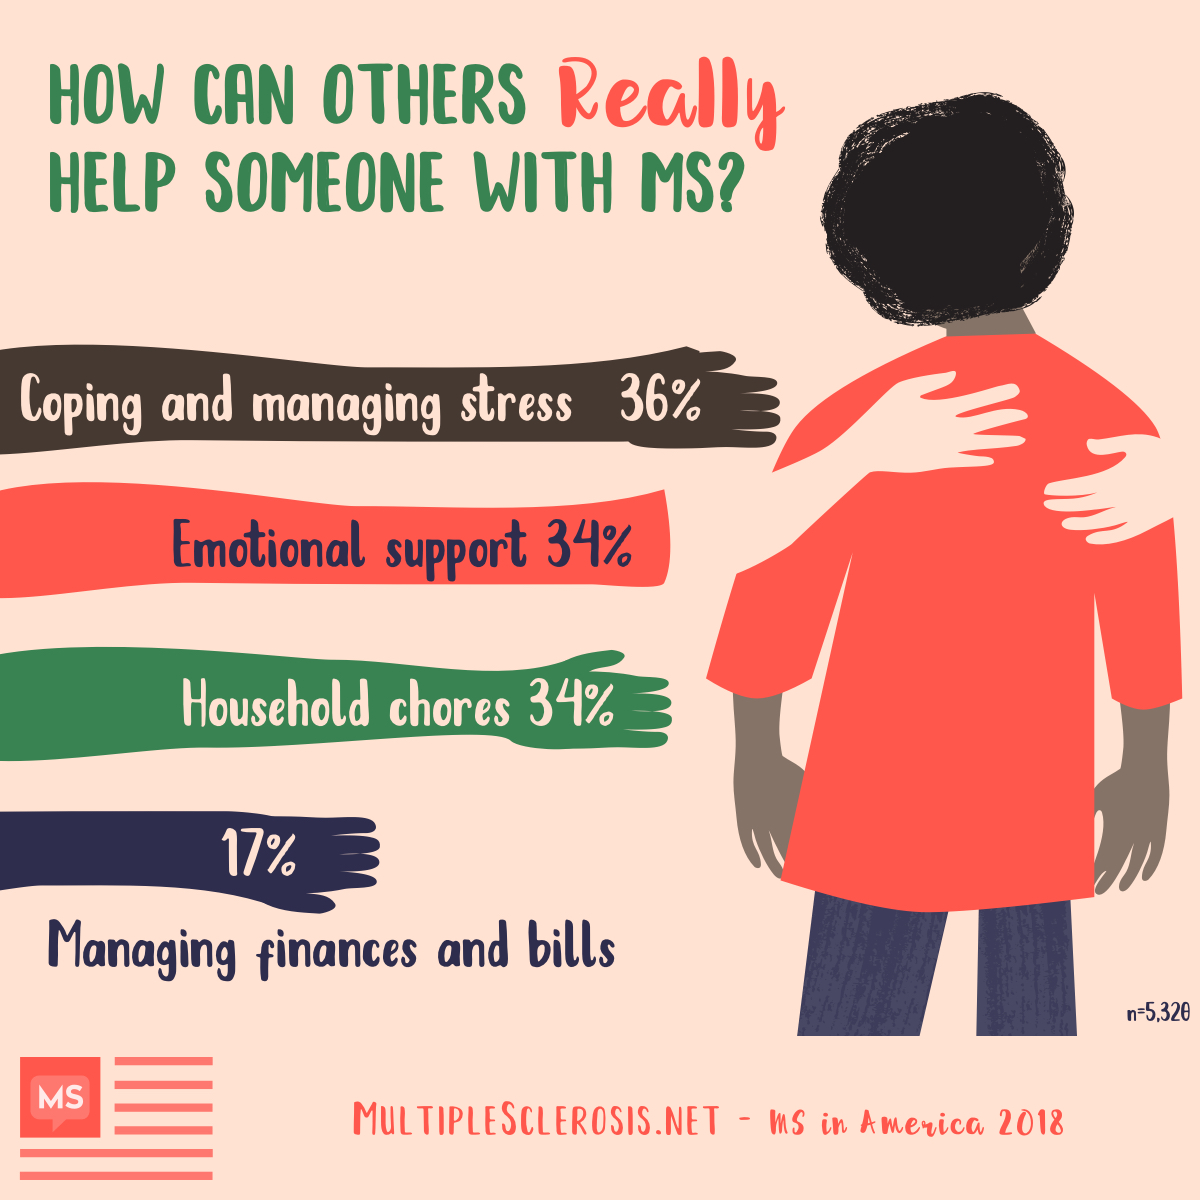 How can others REALLY help someone with MS? 36% need help coping with their MS and managing stress, 34% need emotional support, 34% need help with household chores, 17% need help managing finances and bills, 15% need help with meals and food preparation